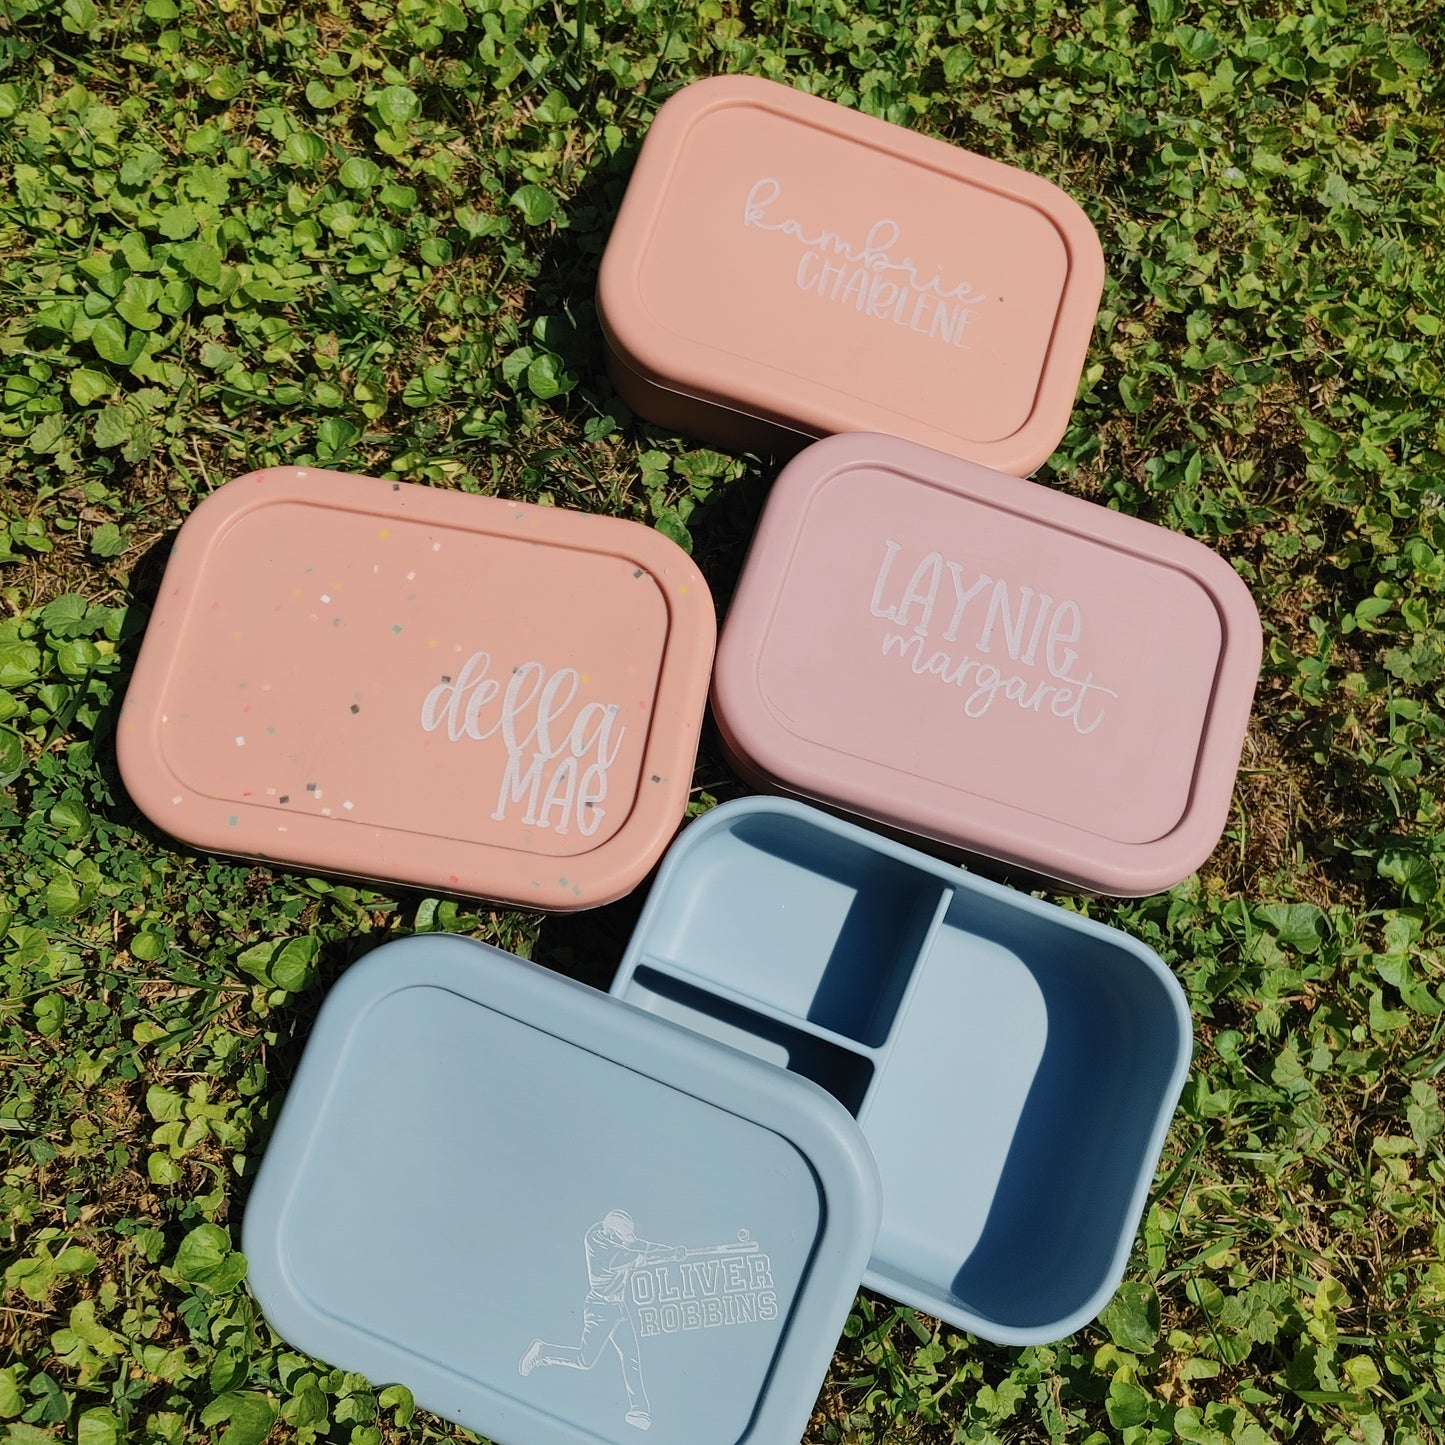 Personalized Silicone Bento Lunch Box: Personalized Lunch Box